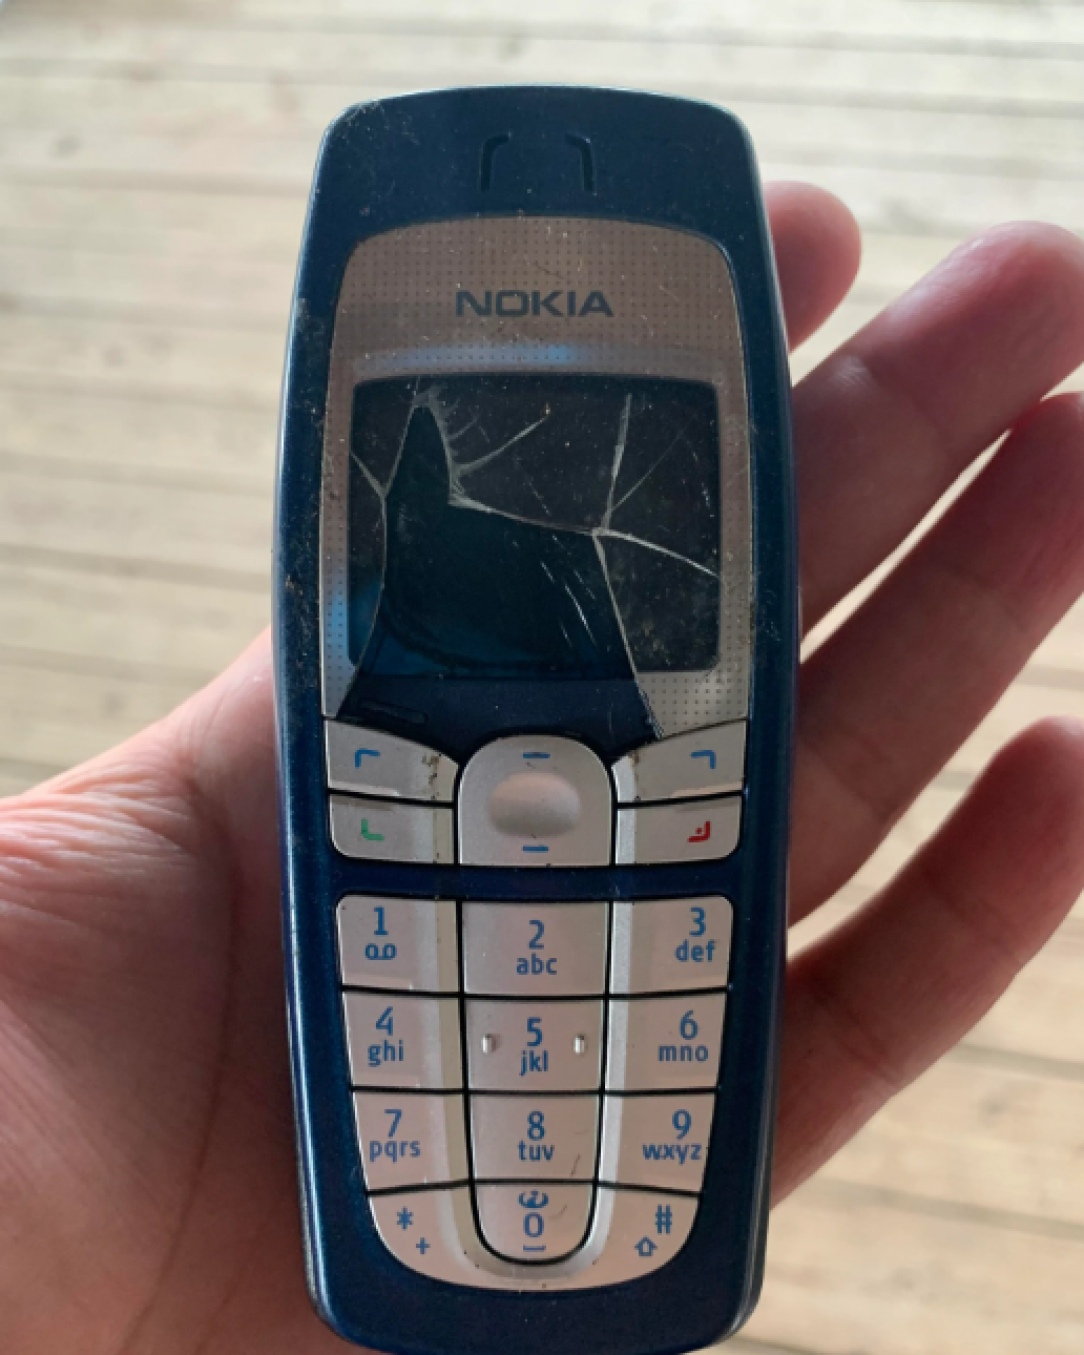 The destroyer, breaker of the Nokia phone